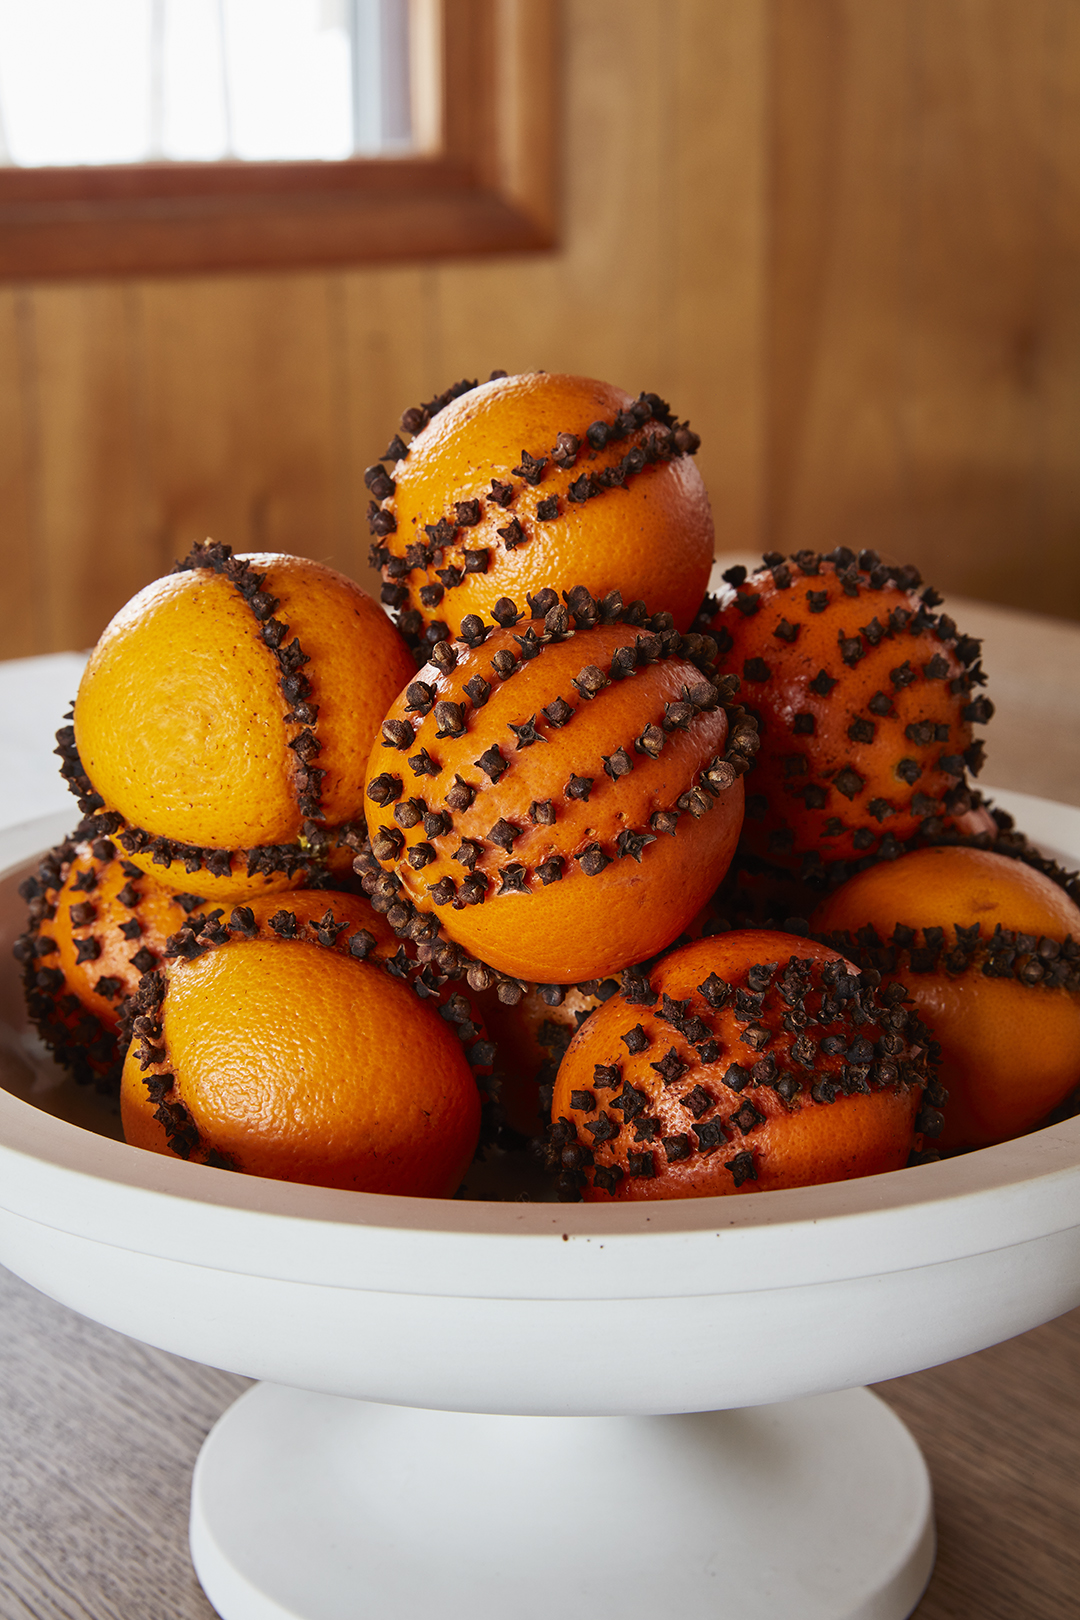 festive oranges with cloves arranged in bowl